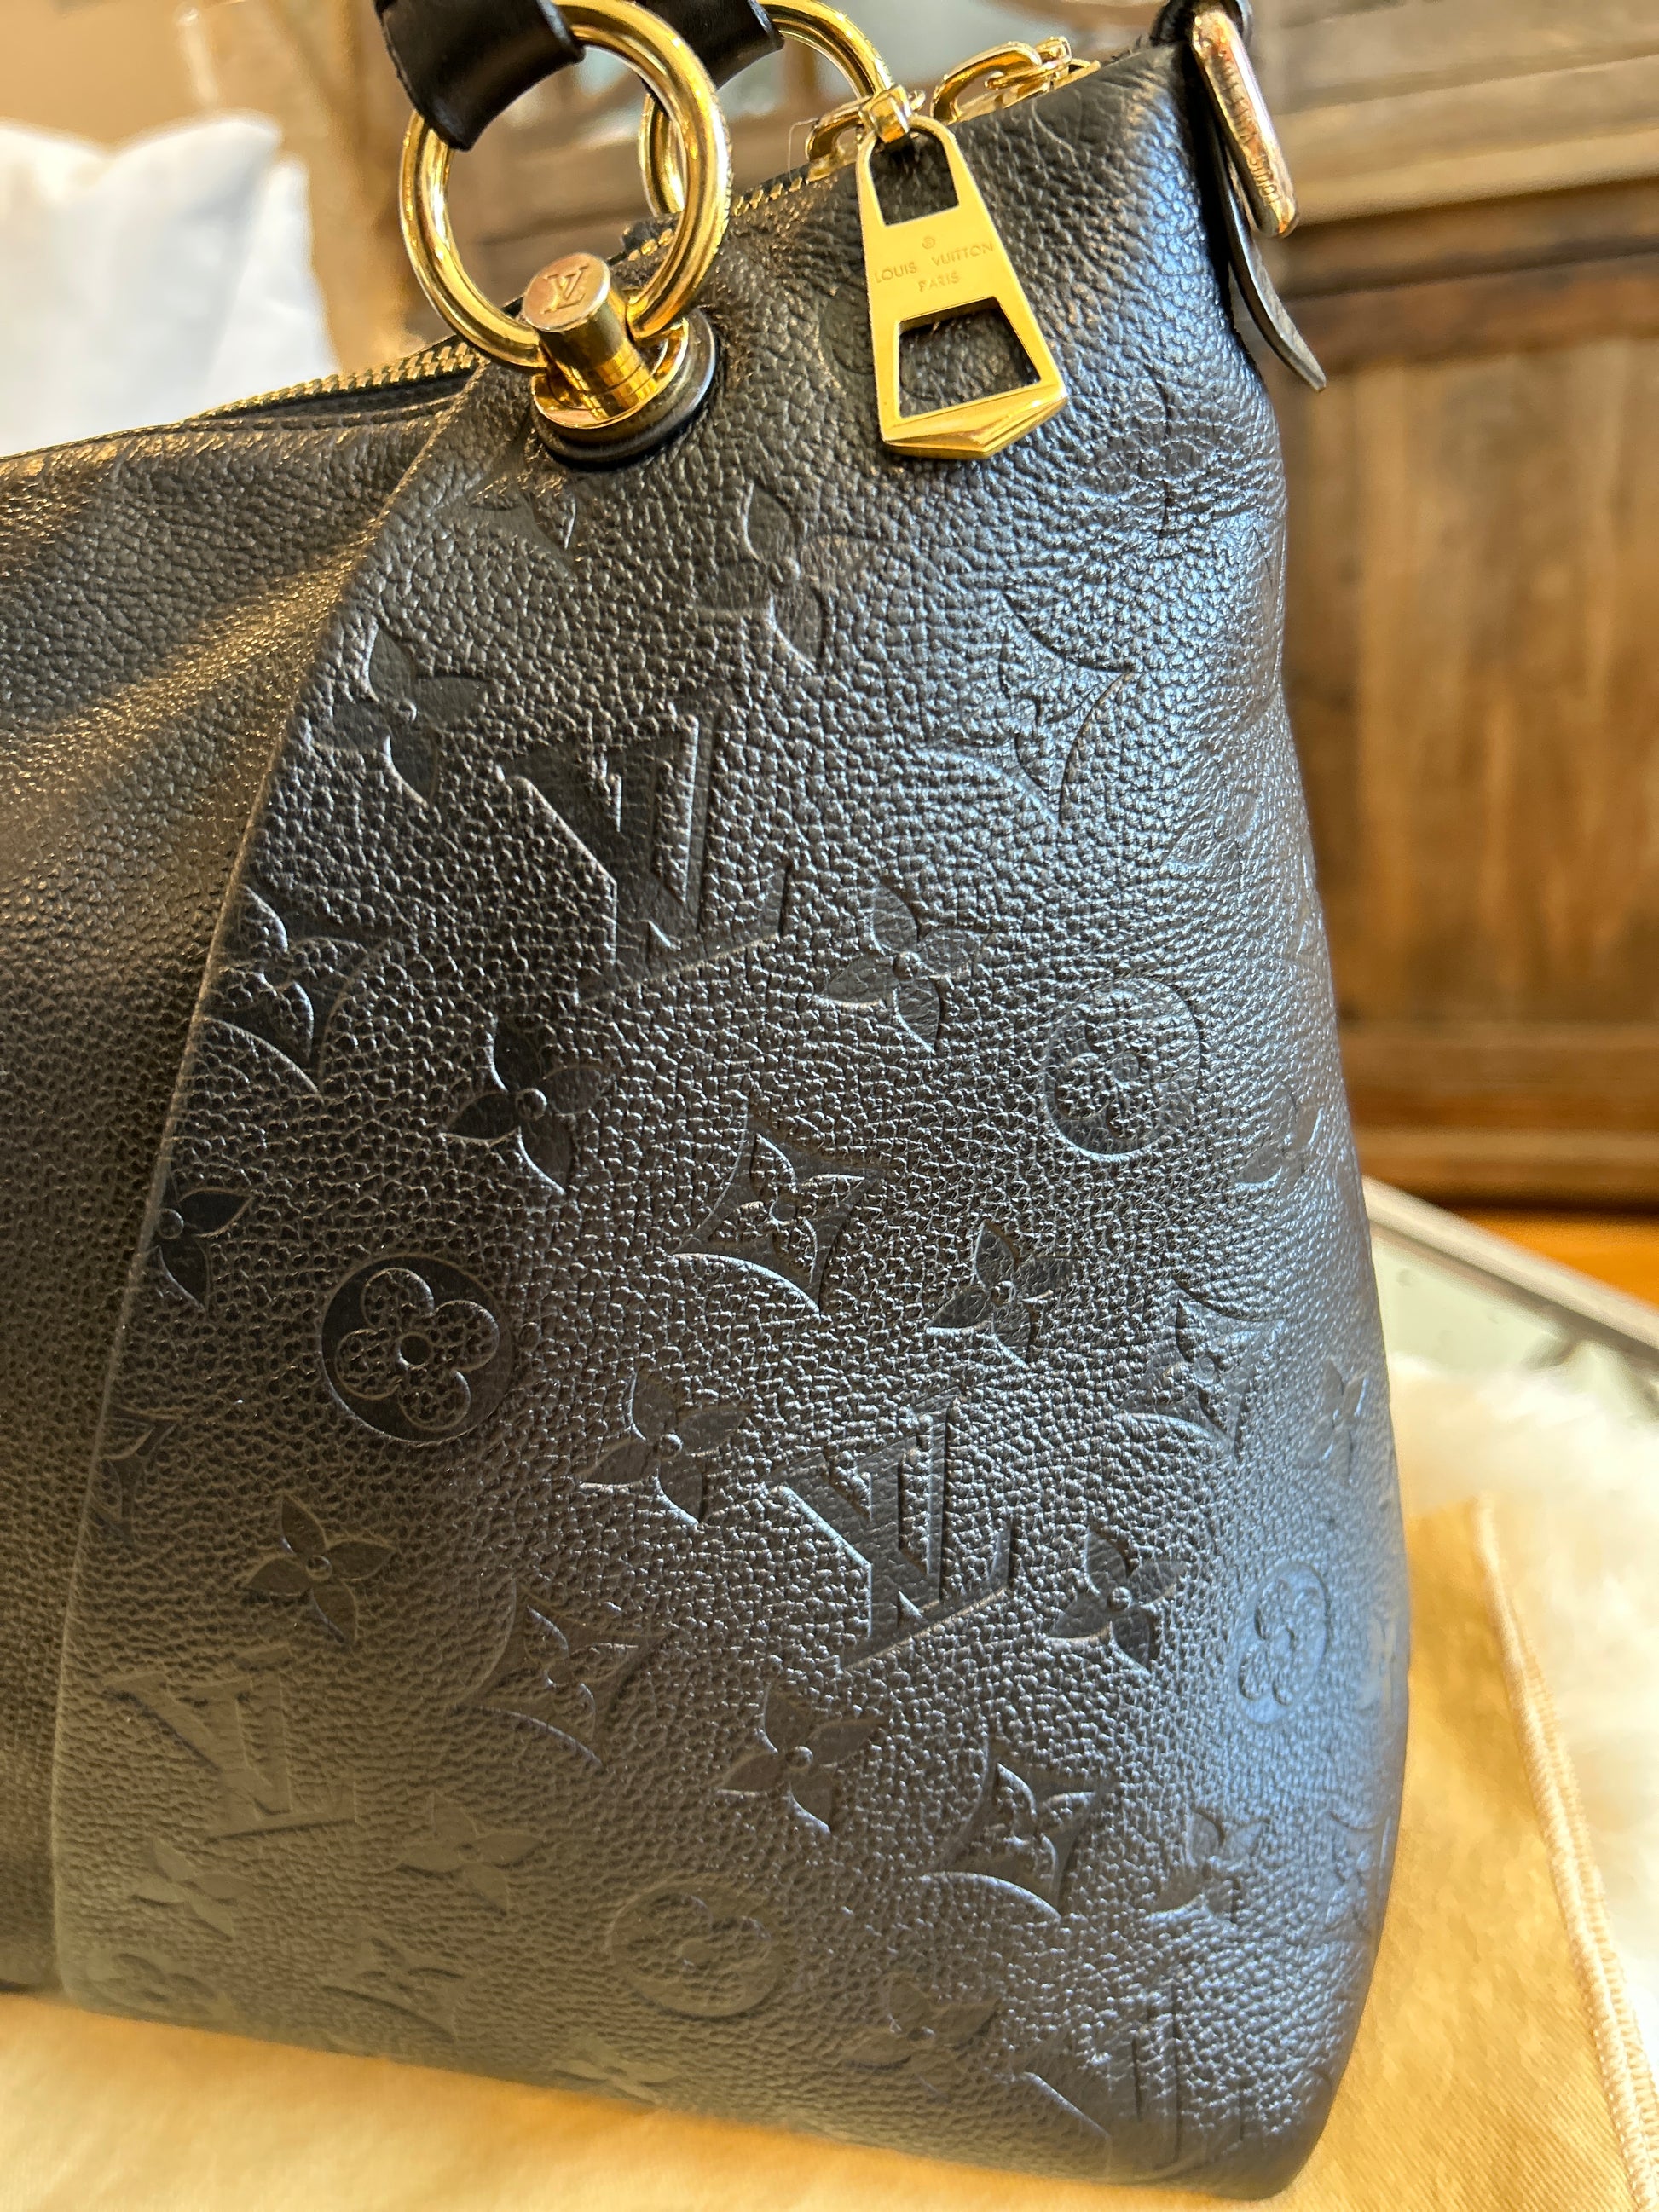 Louis Vuitton V Tote Monogram Canvas and Leather MM Black, Brown AUTHENTIC